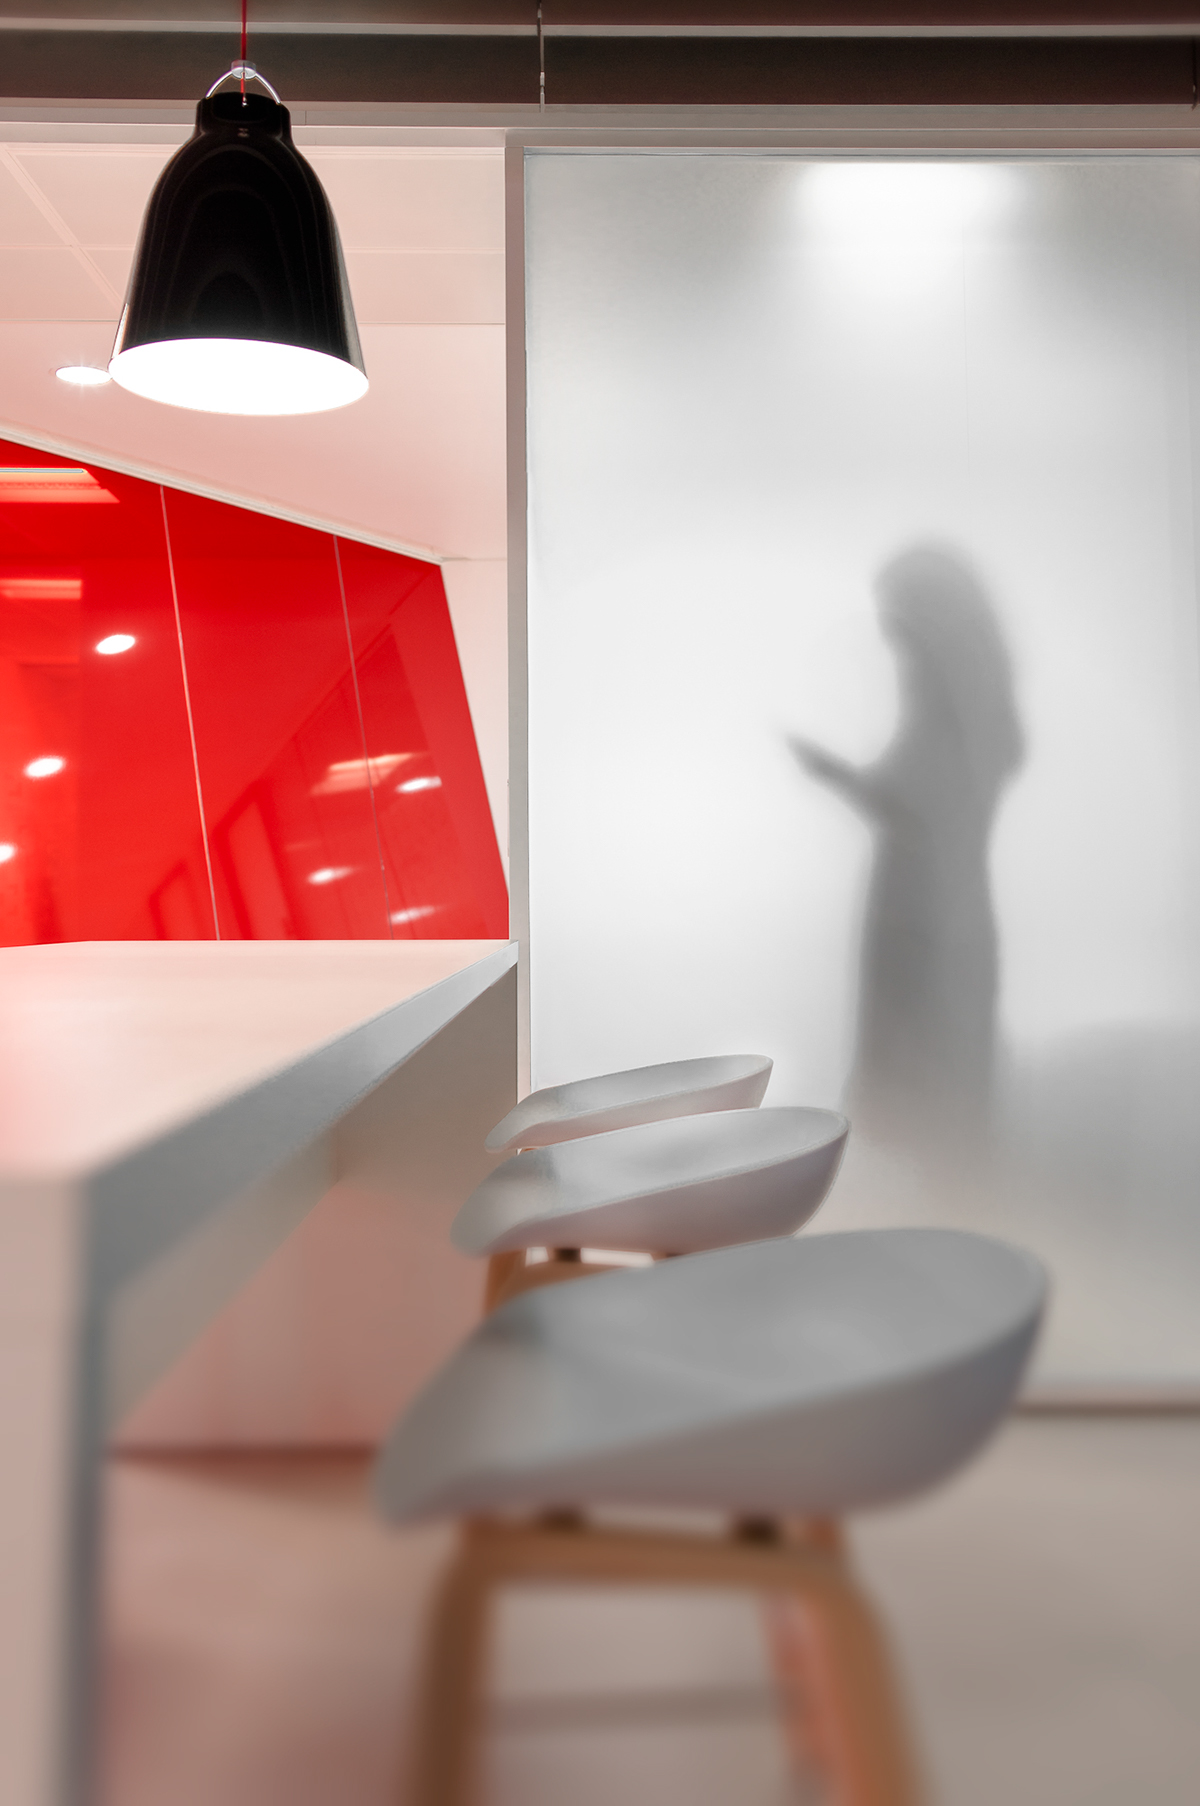 interiors Office workplace Vitra EAMES wall red colour bright finance asset management